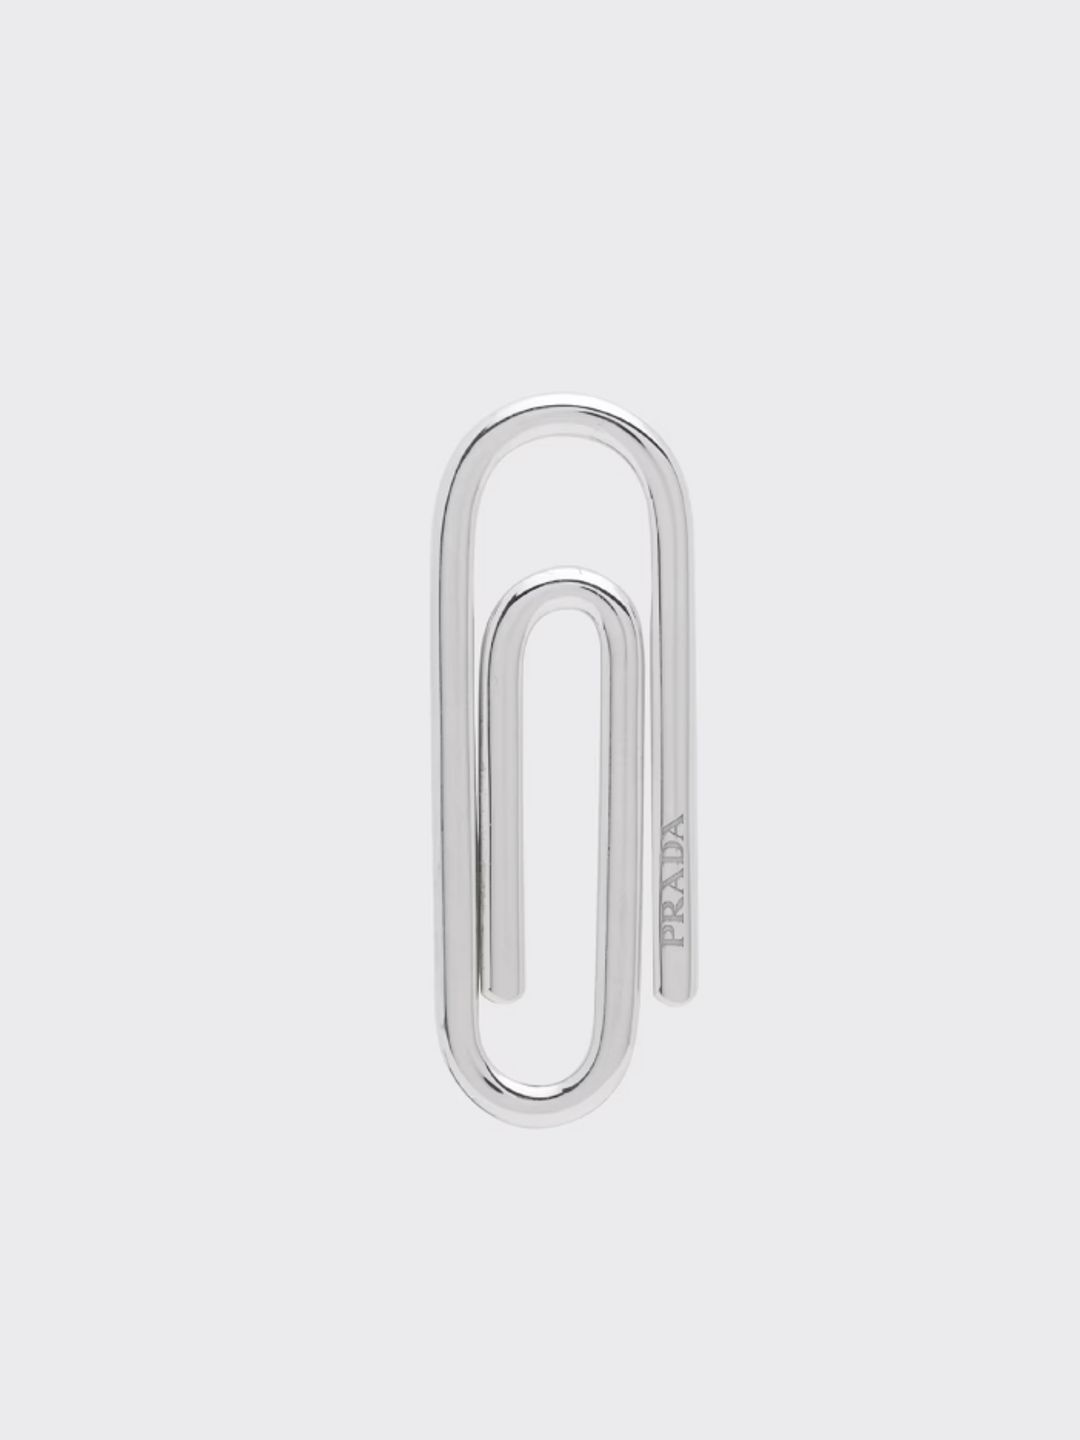 On the Prada website, they describe the item as a "Sleek money clip with engraved lettering logo"